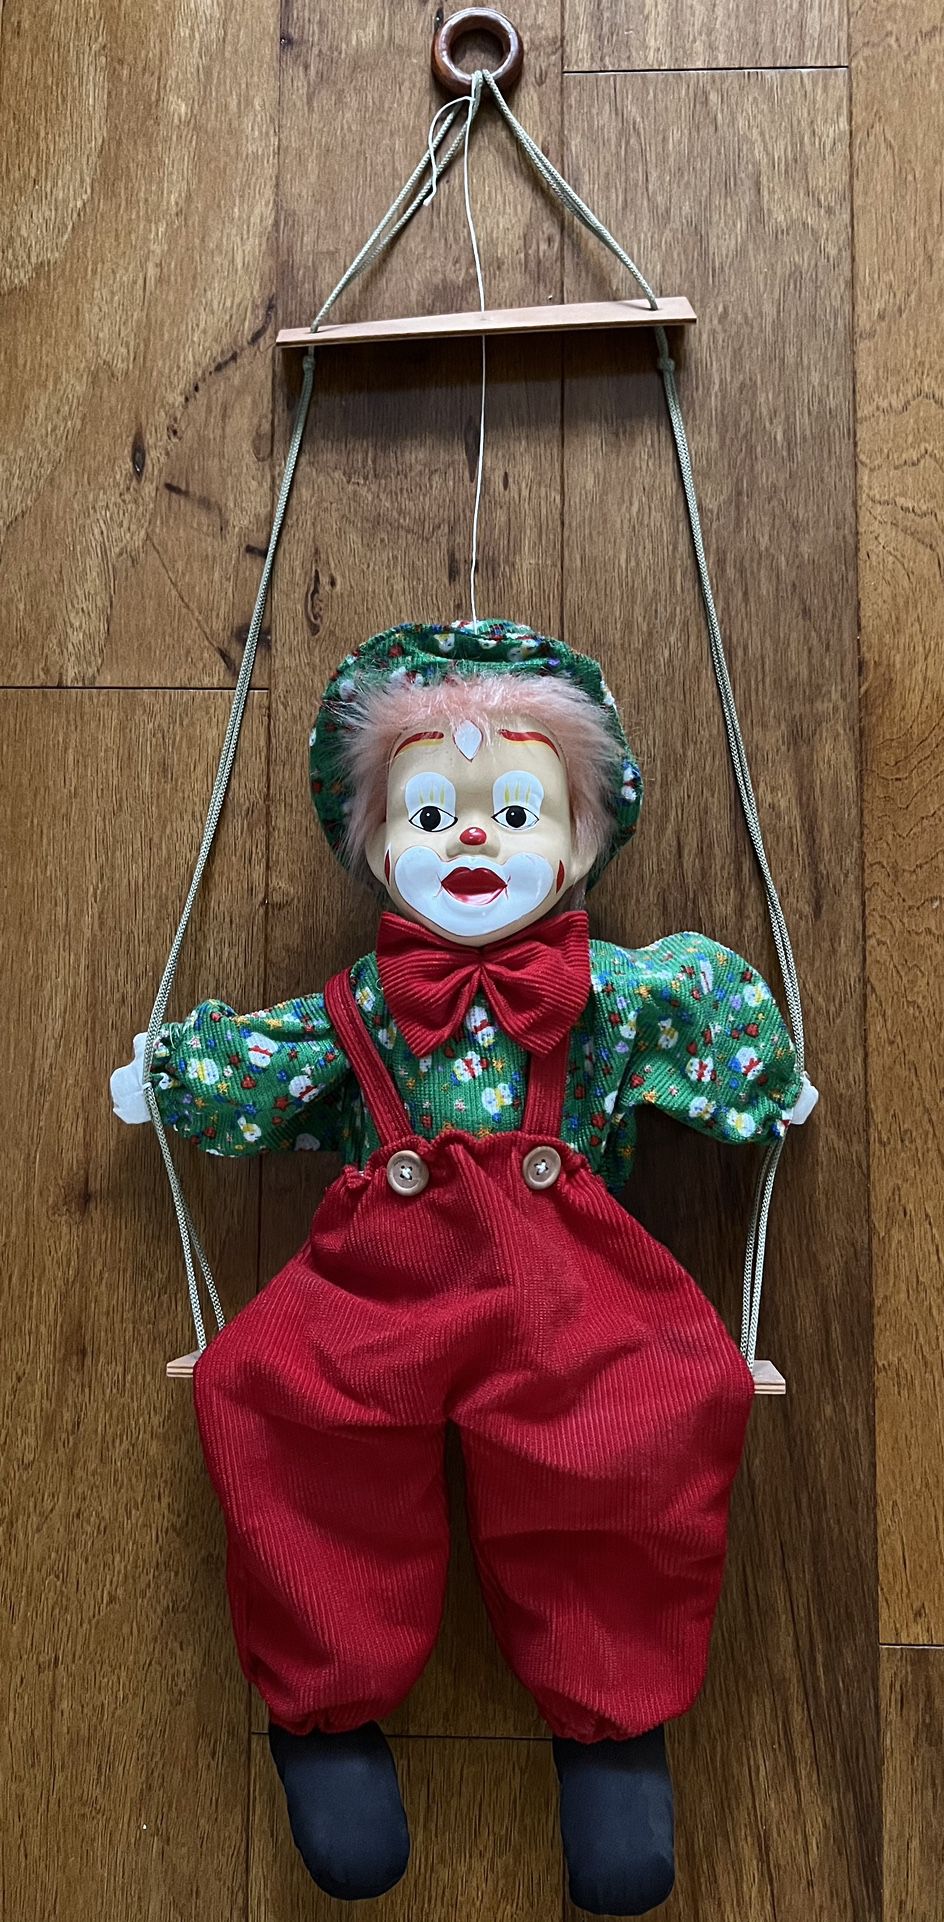 large vintage clown on swing soft bodied clown with porcelain face red hair collectible  In great condition  Approx 31 inches tall  Body of the clown 